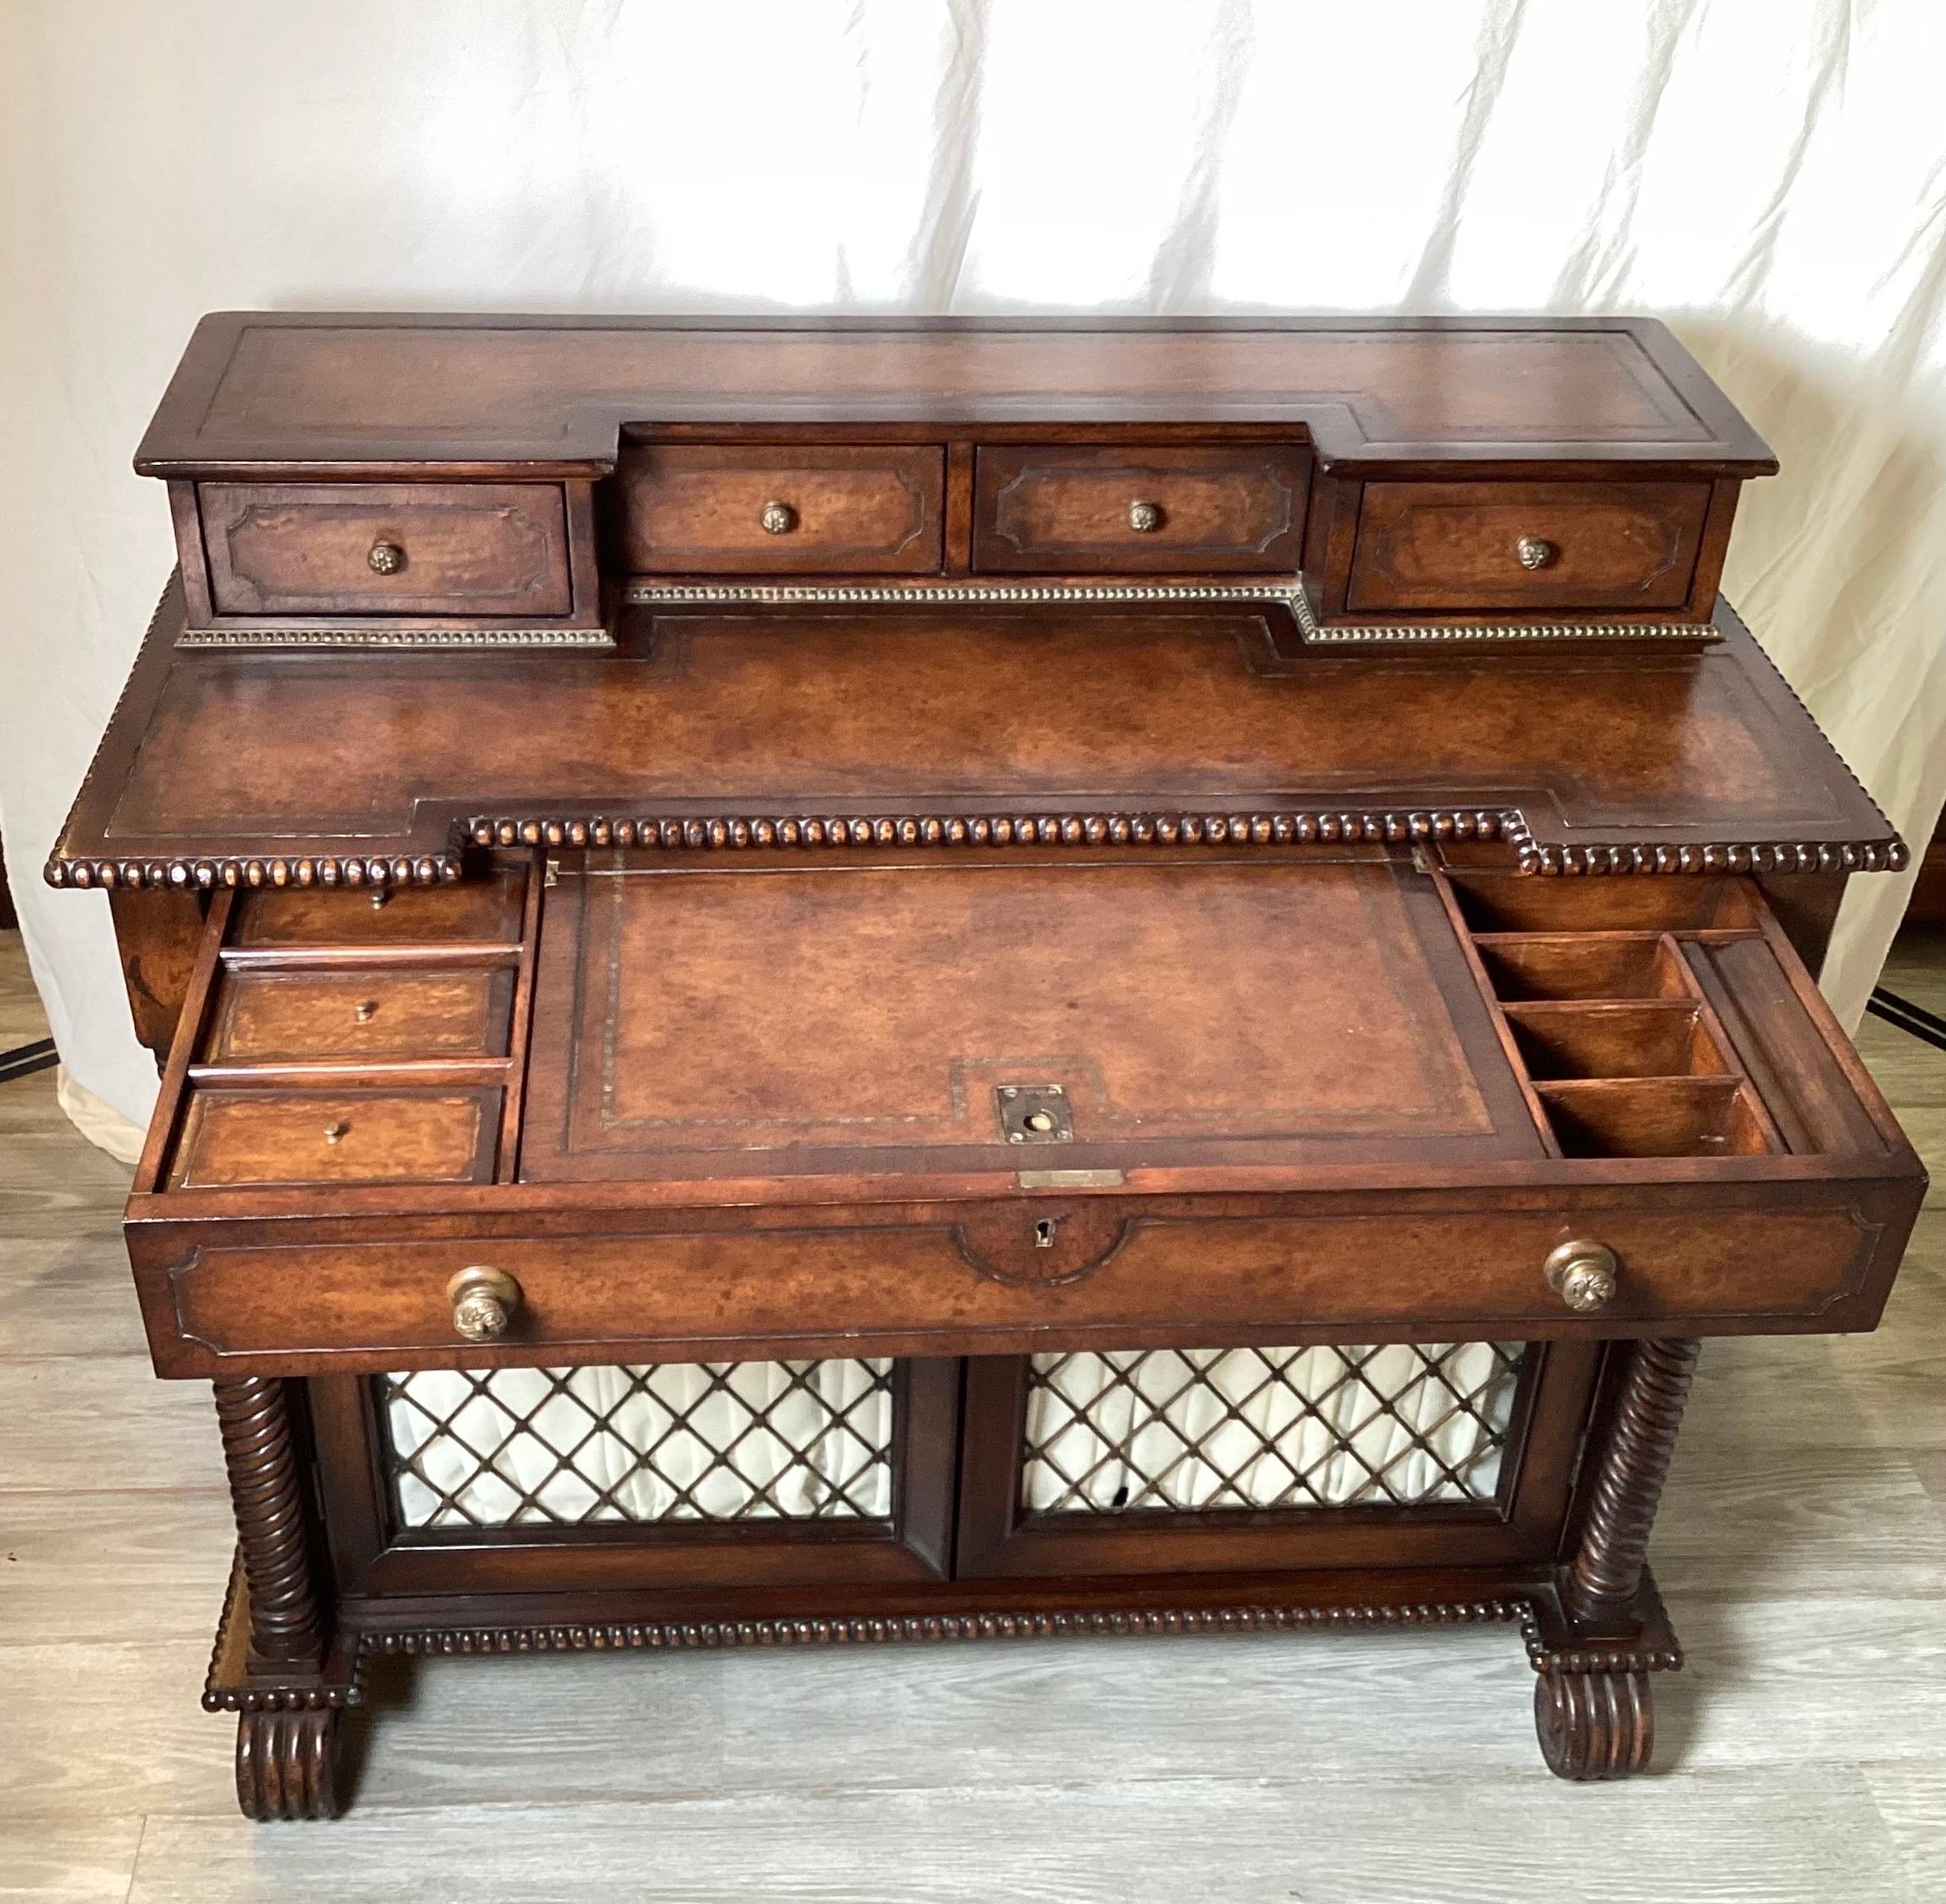 Regency Style Console Desk with Leather Top In Good Condition For Sale In Lambertville, NJ